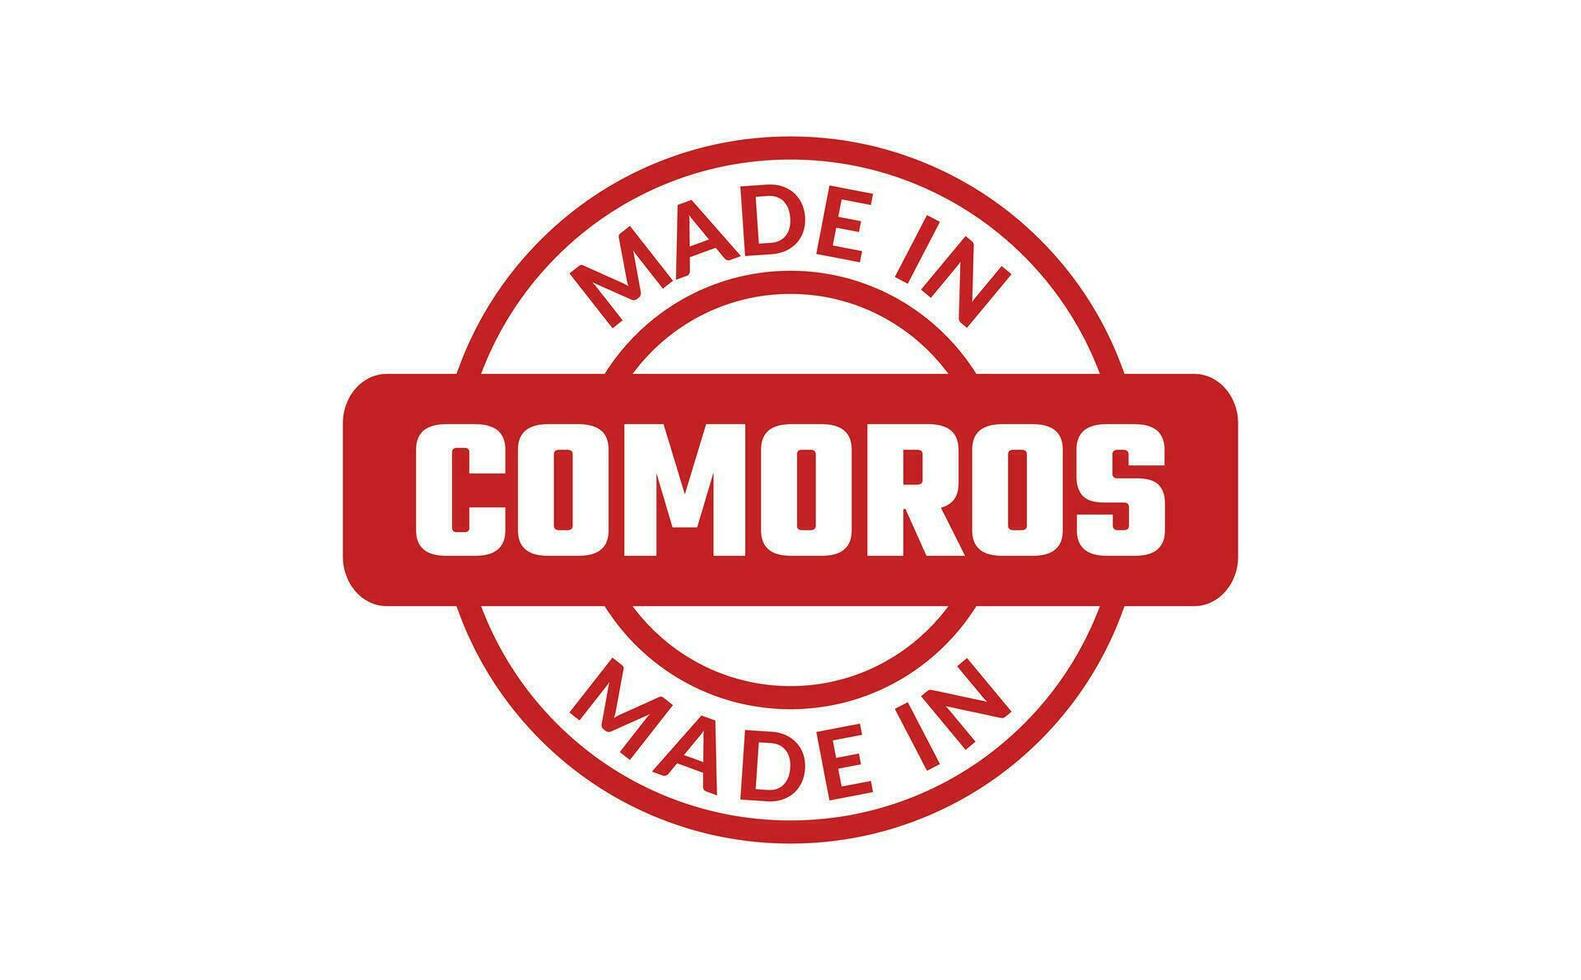 Made In Comoros Rubber Stamp vector